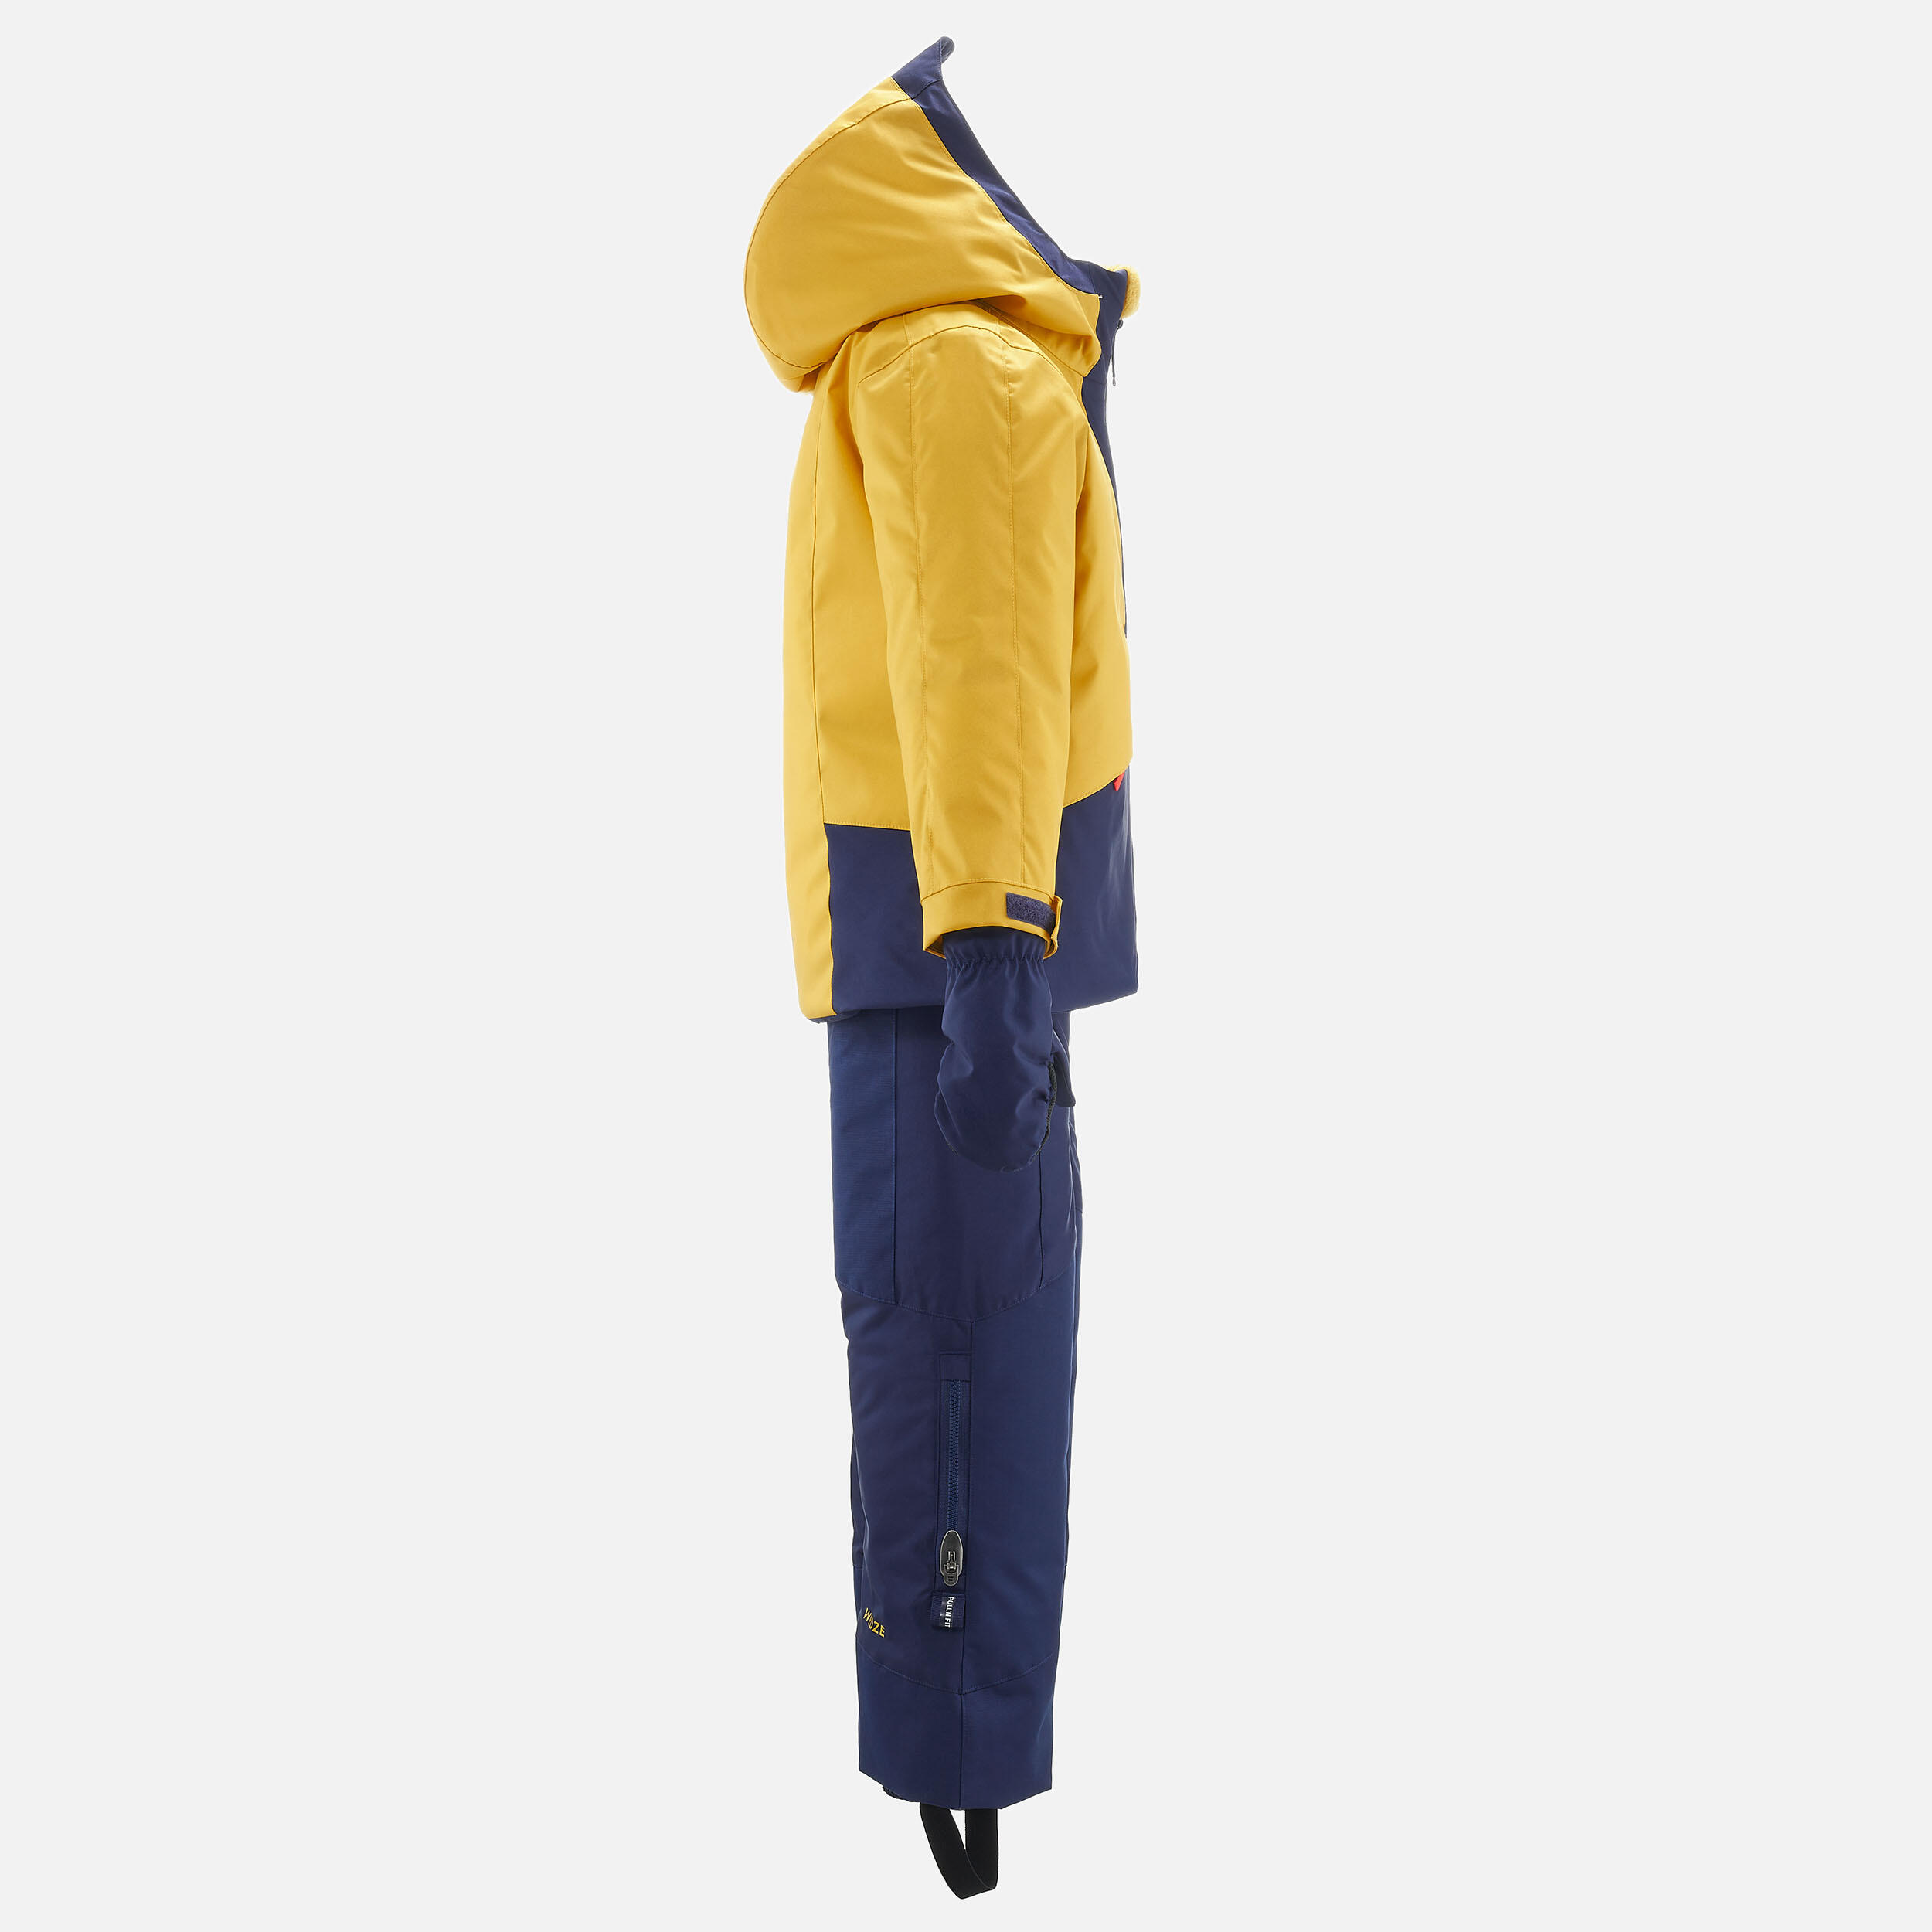 Kids’ Warm and Waterproof Ski Suit 580 - Yellow and Blue 3/15